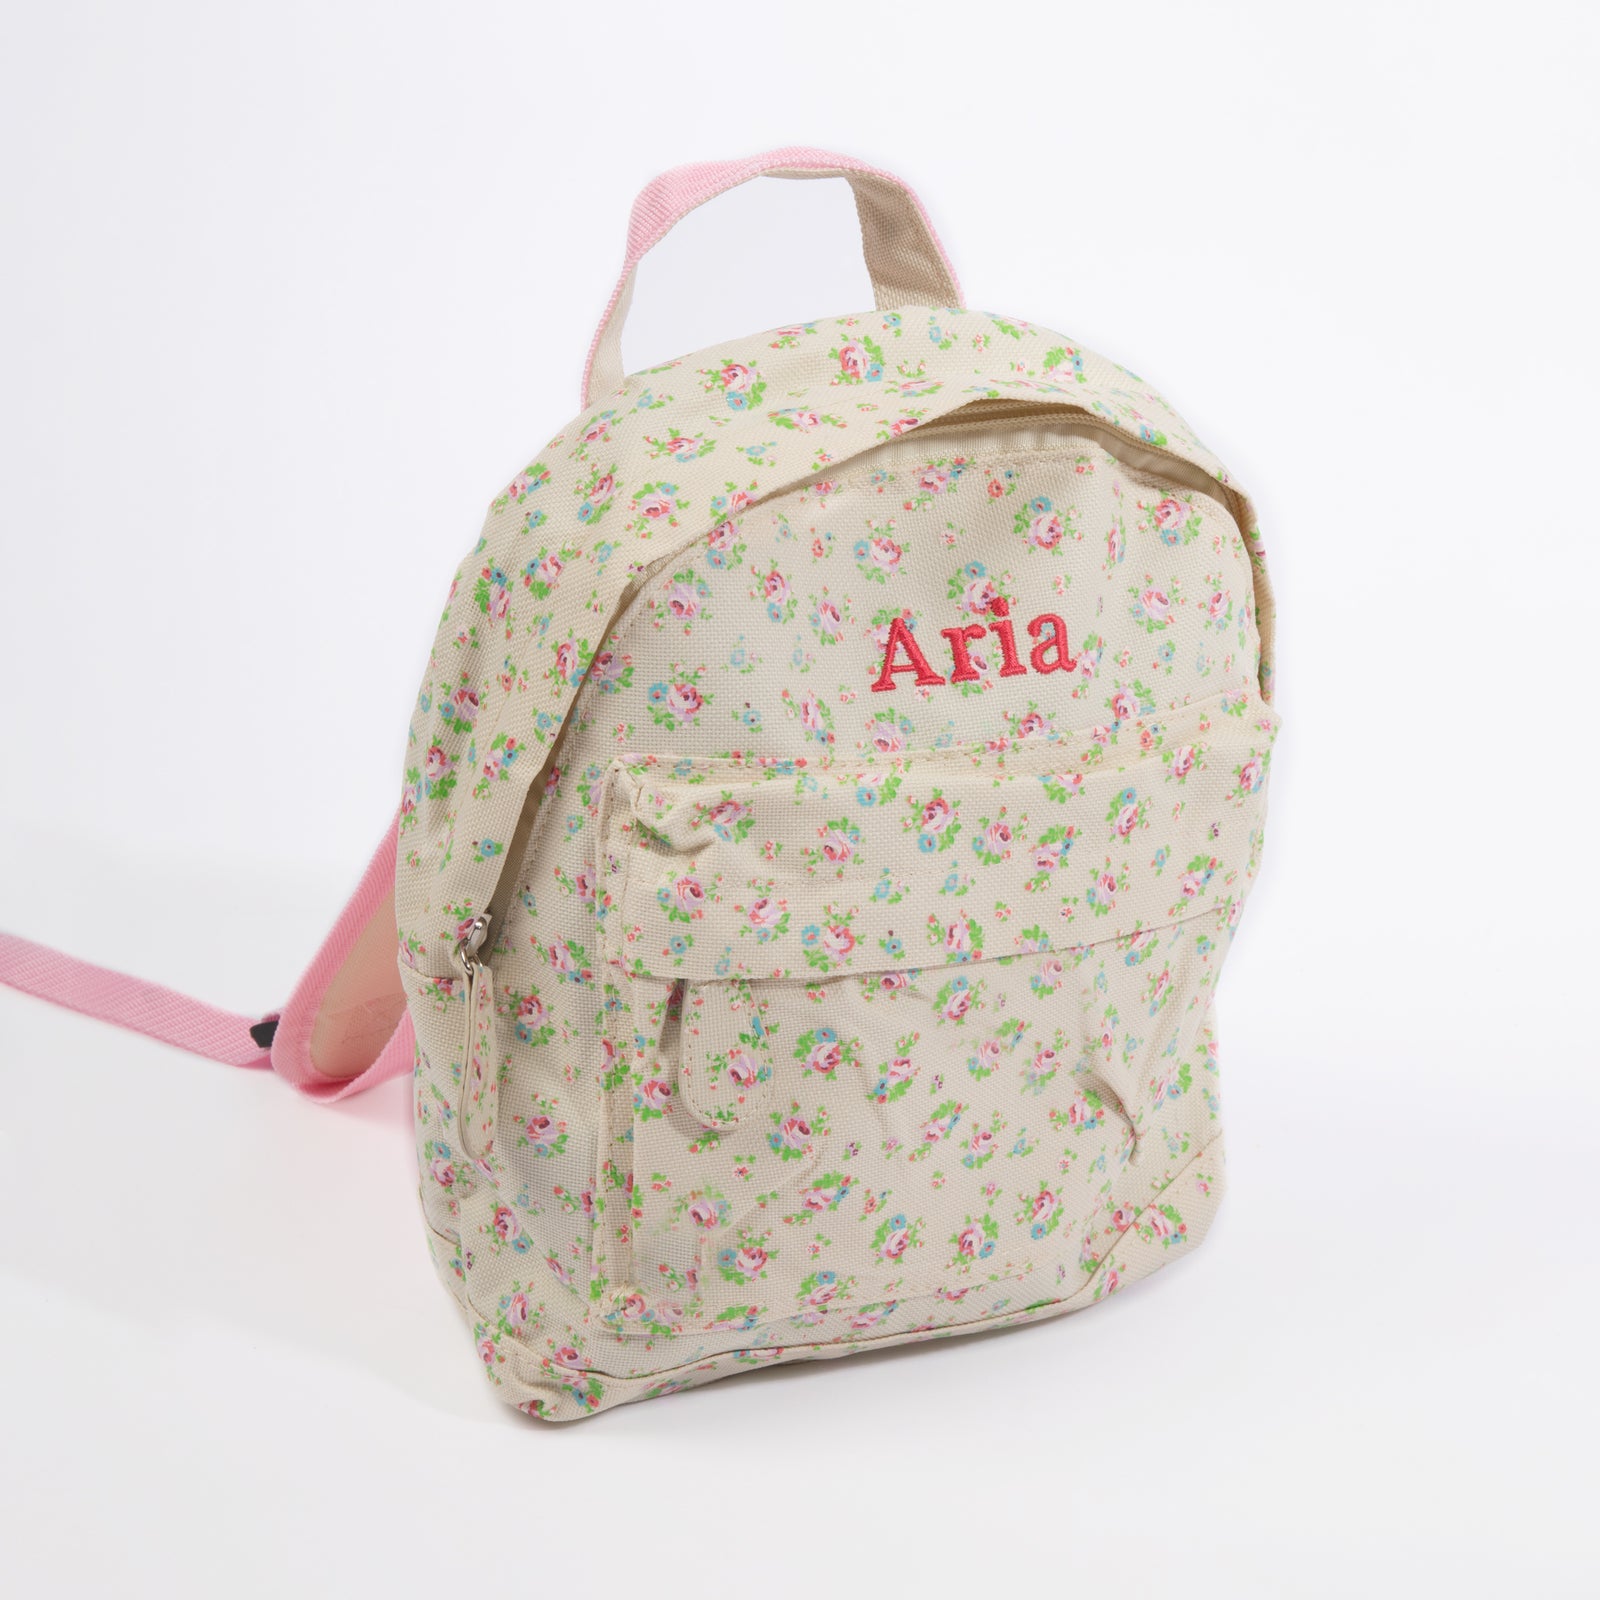 Embroidered Mini Floral Backpack